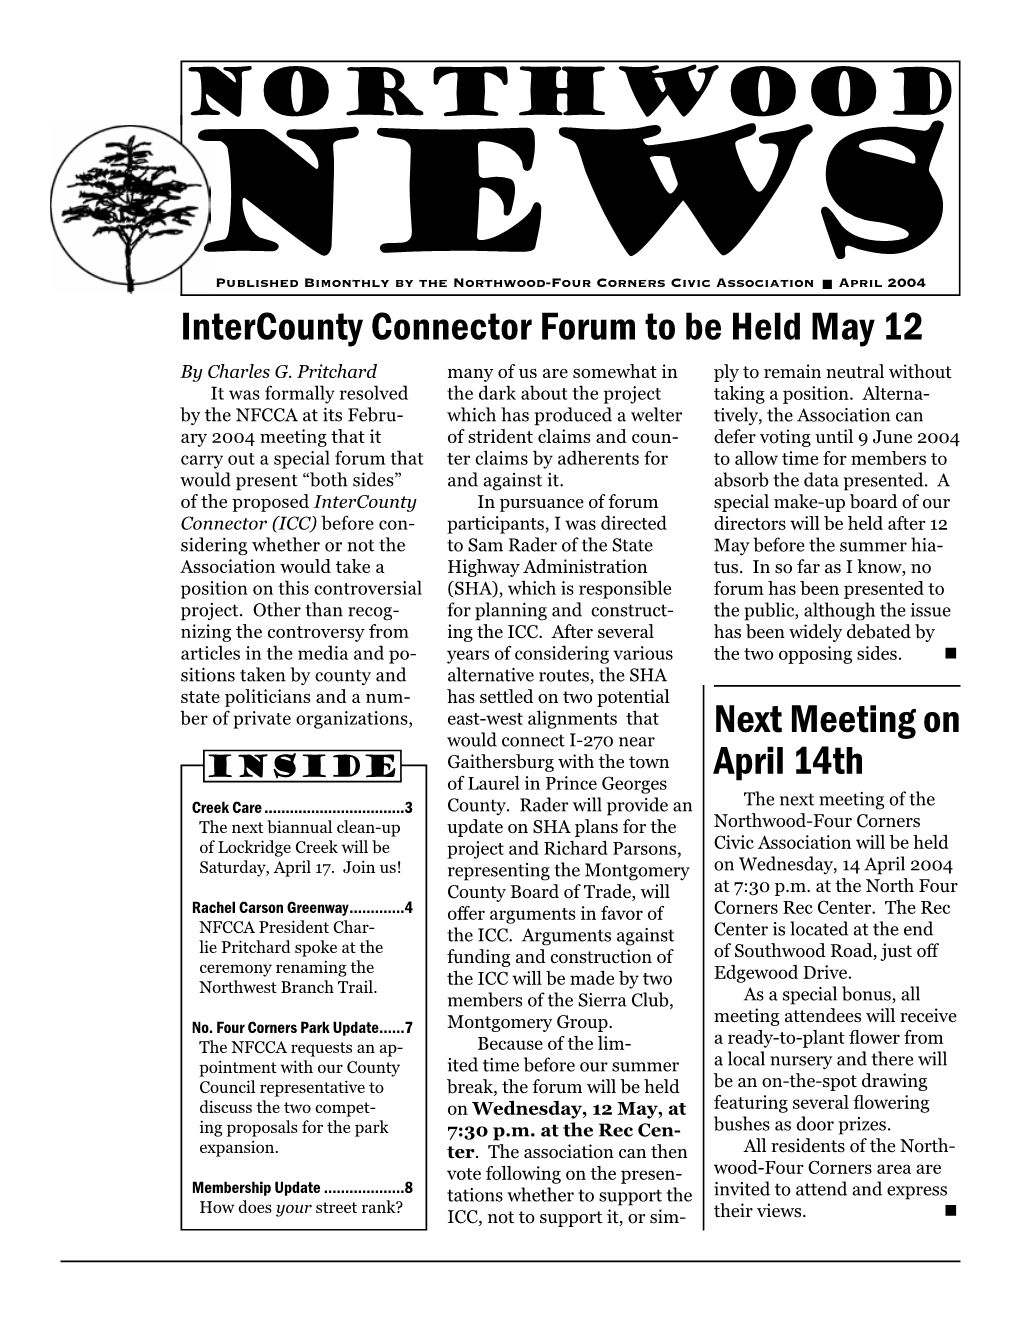 Northwood-Four Corners Civic Association ■ April 2004 Intercounty Connector Forum to Be Held May 12 by Charles G